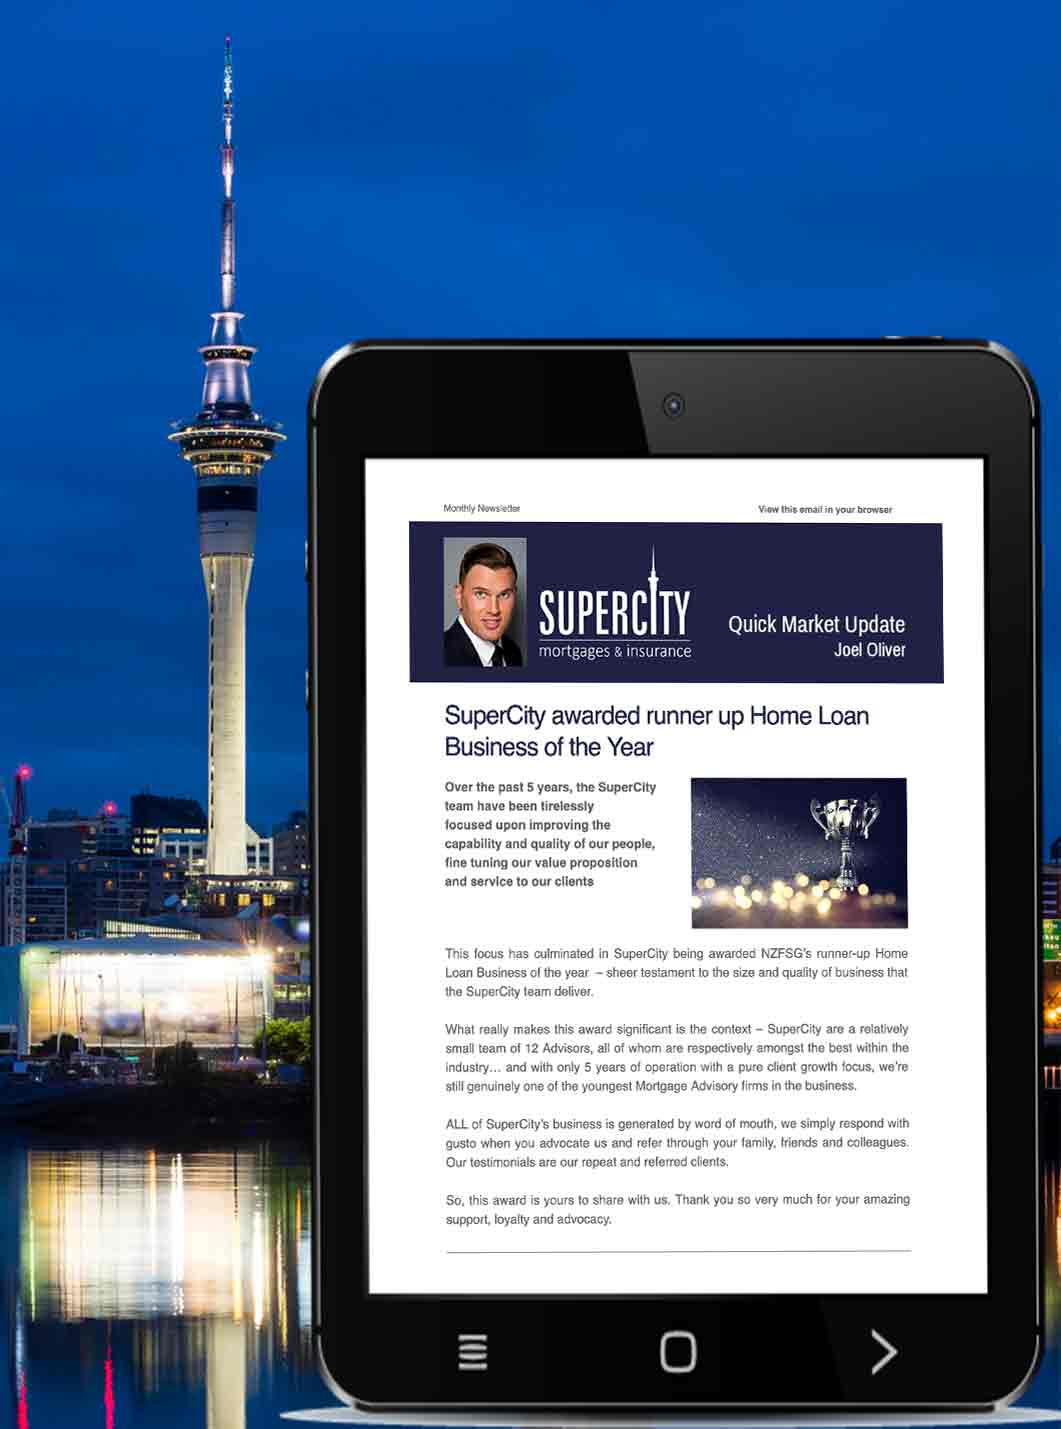 SuperCity Mortgages and Insurance Mailchimp newsletter, Auckland NZ